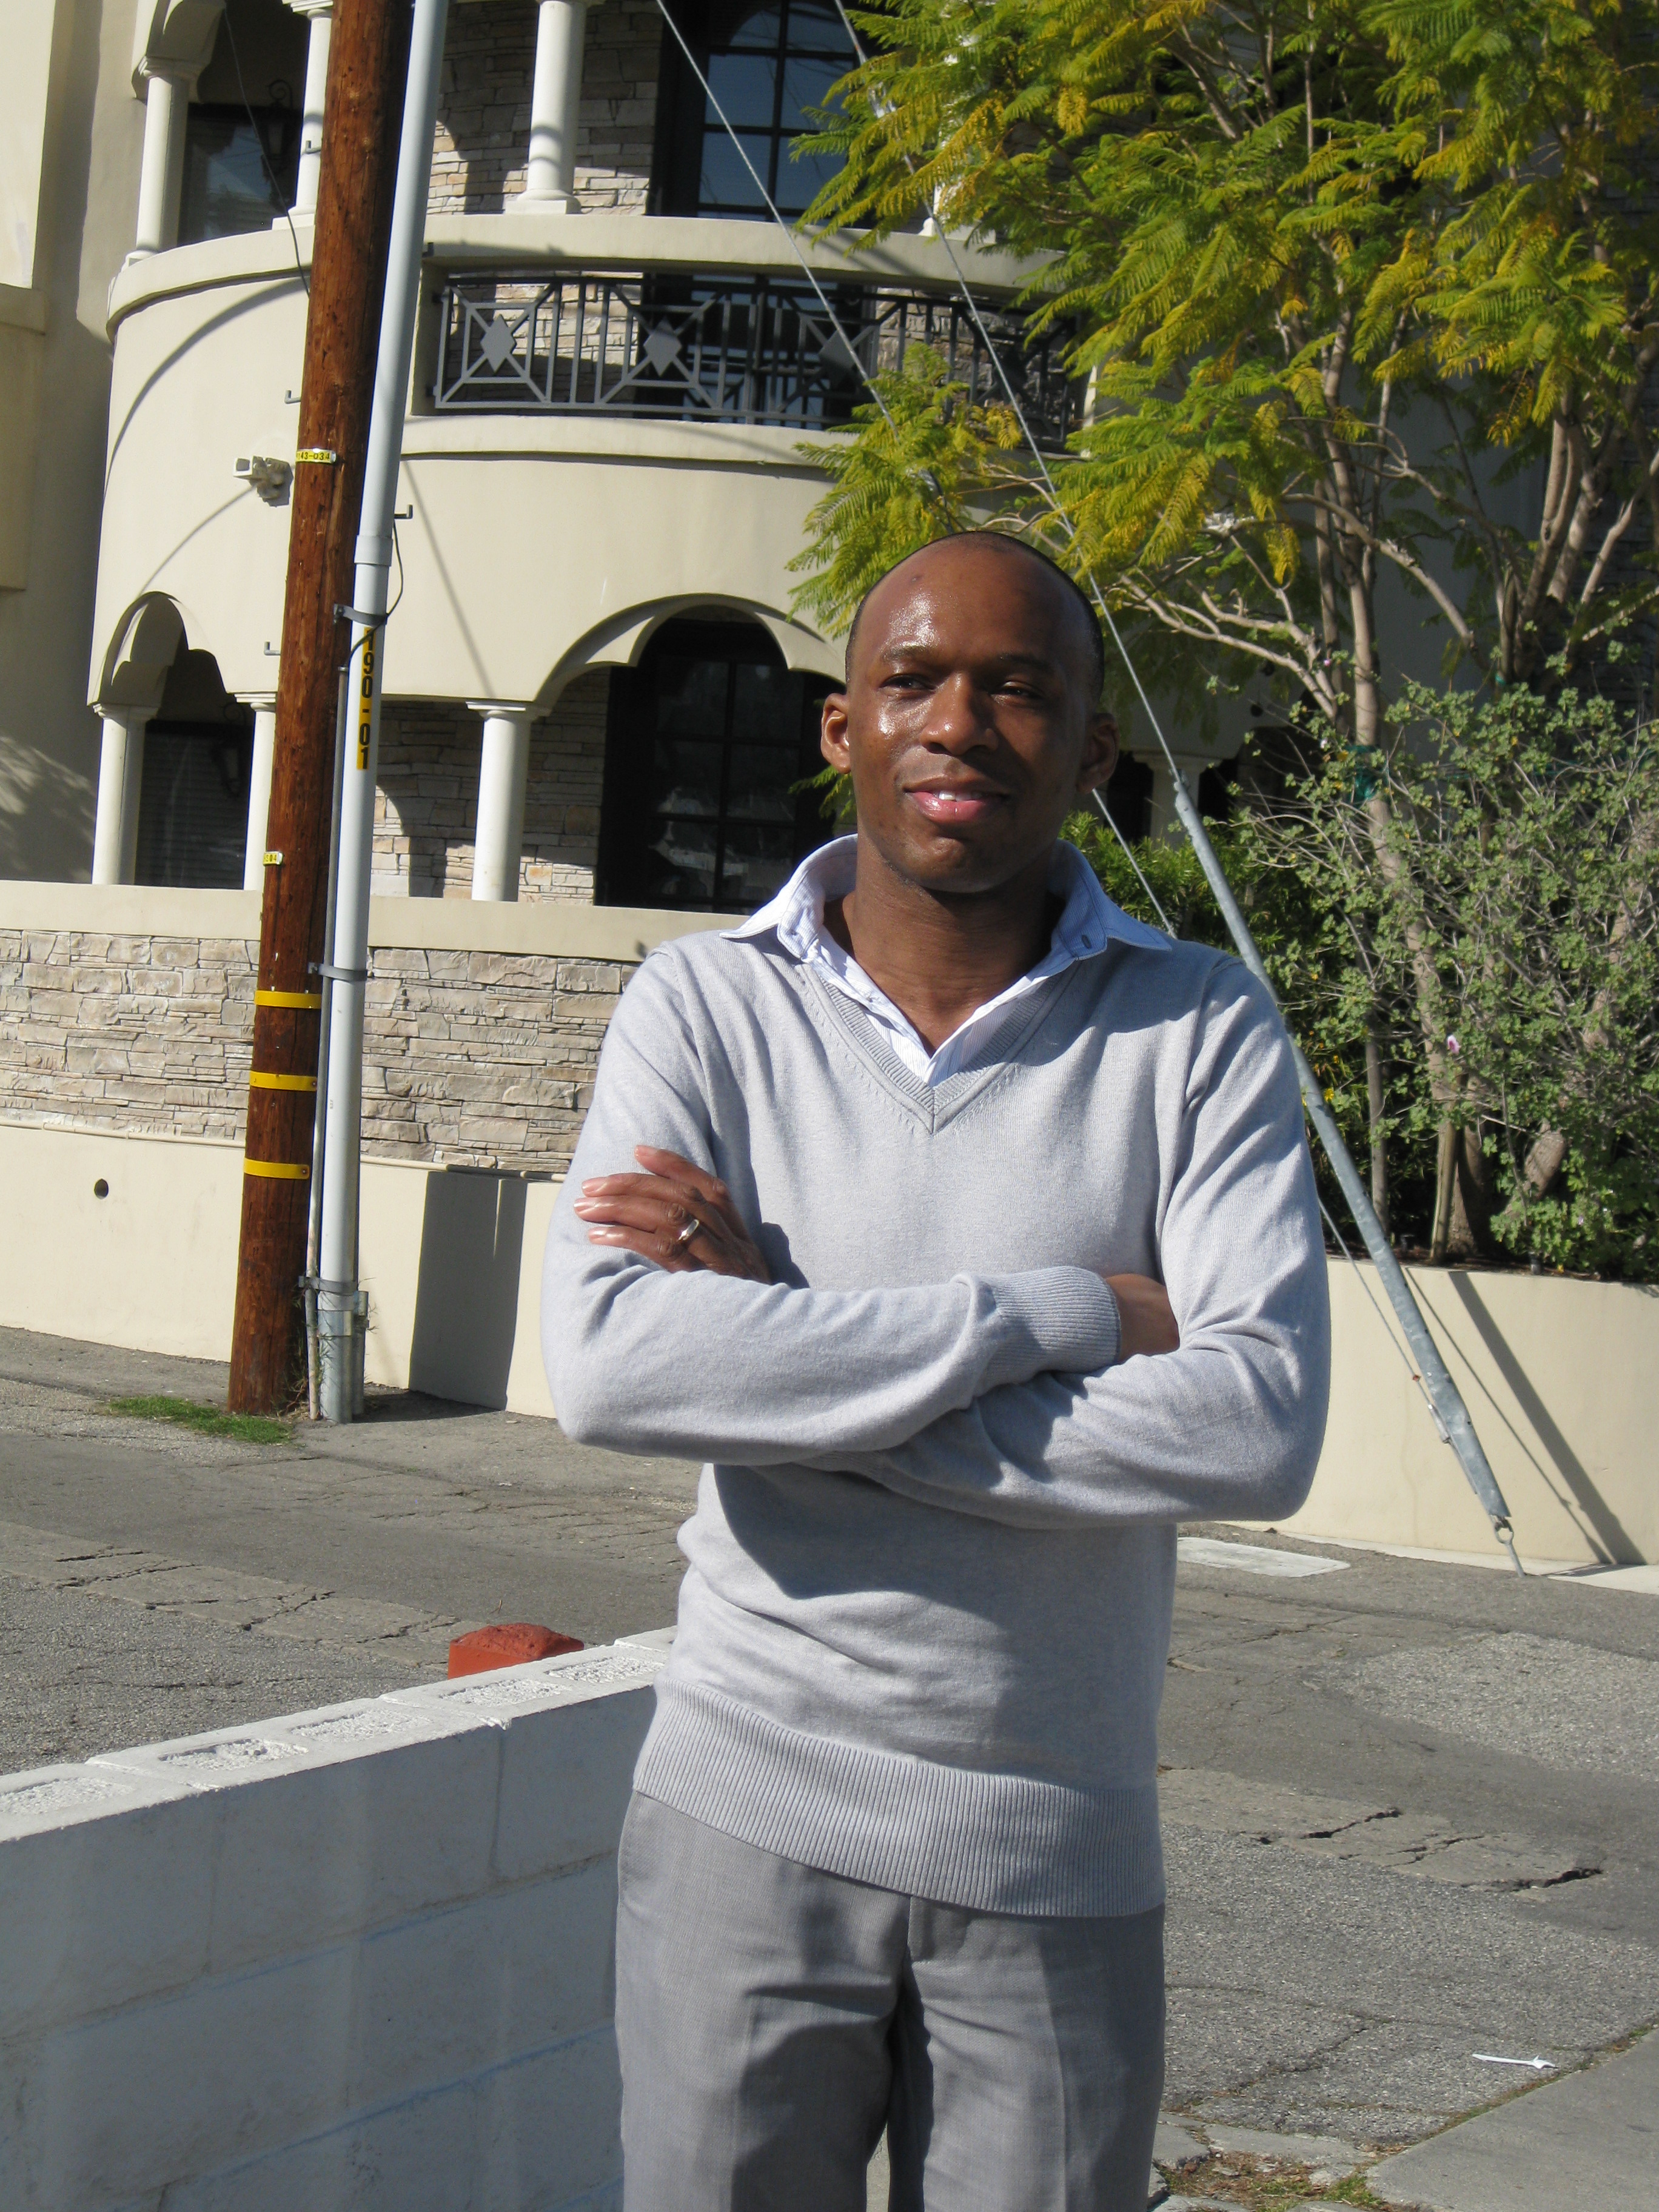 David Olawale Ayinde, Actor taking in the view of a street in Sherman Oaks, California.